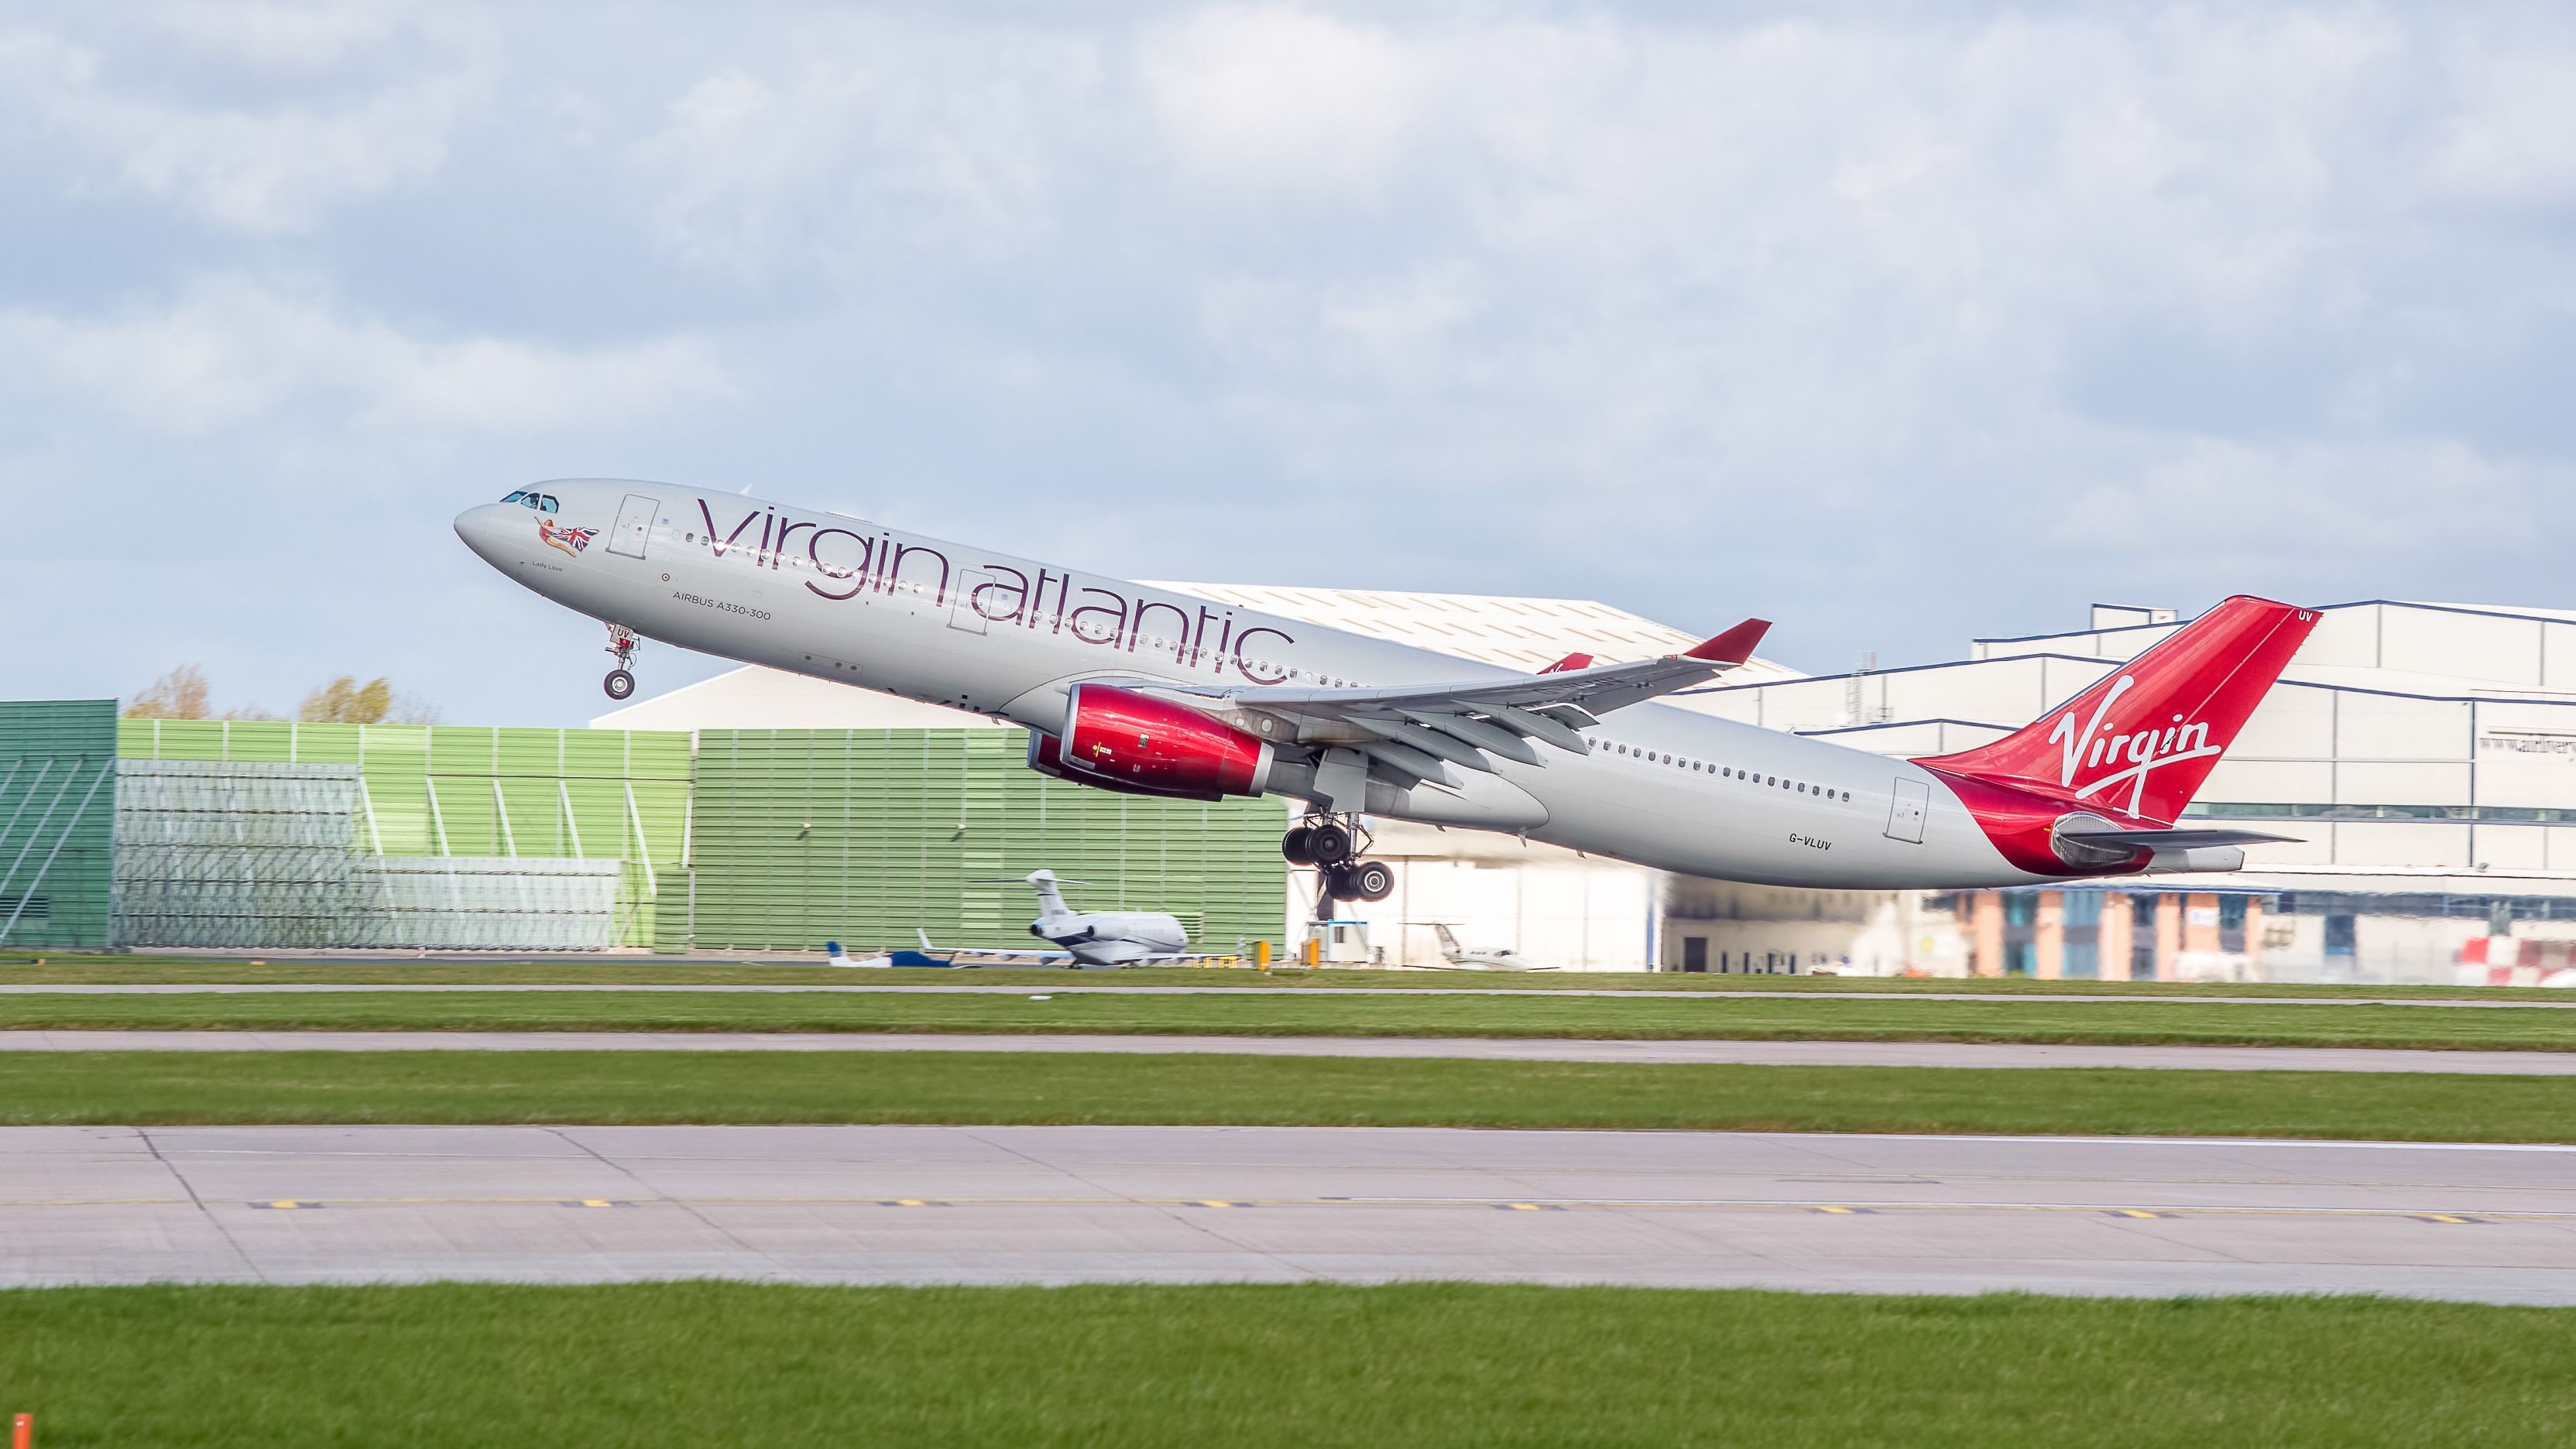 A Virgin Atlantic Airbus A330 taking off from Manchester airport.